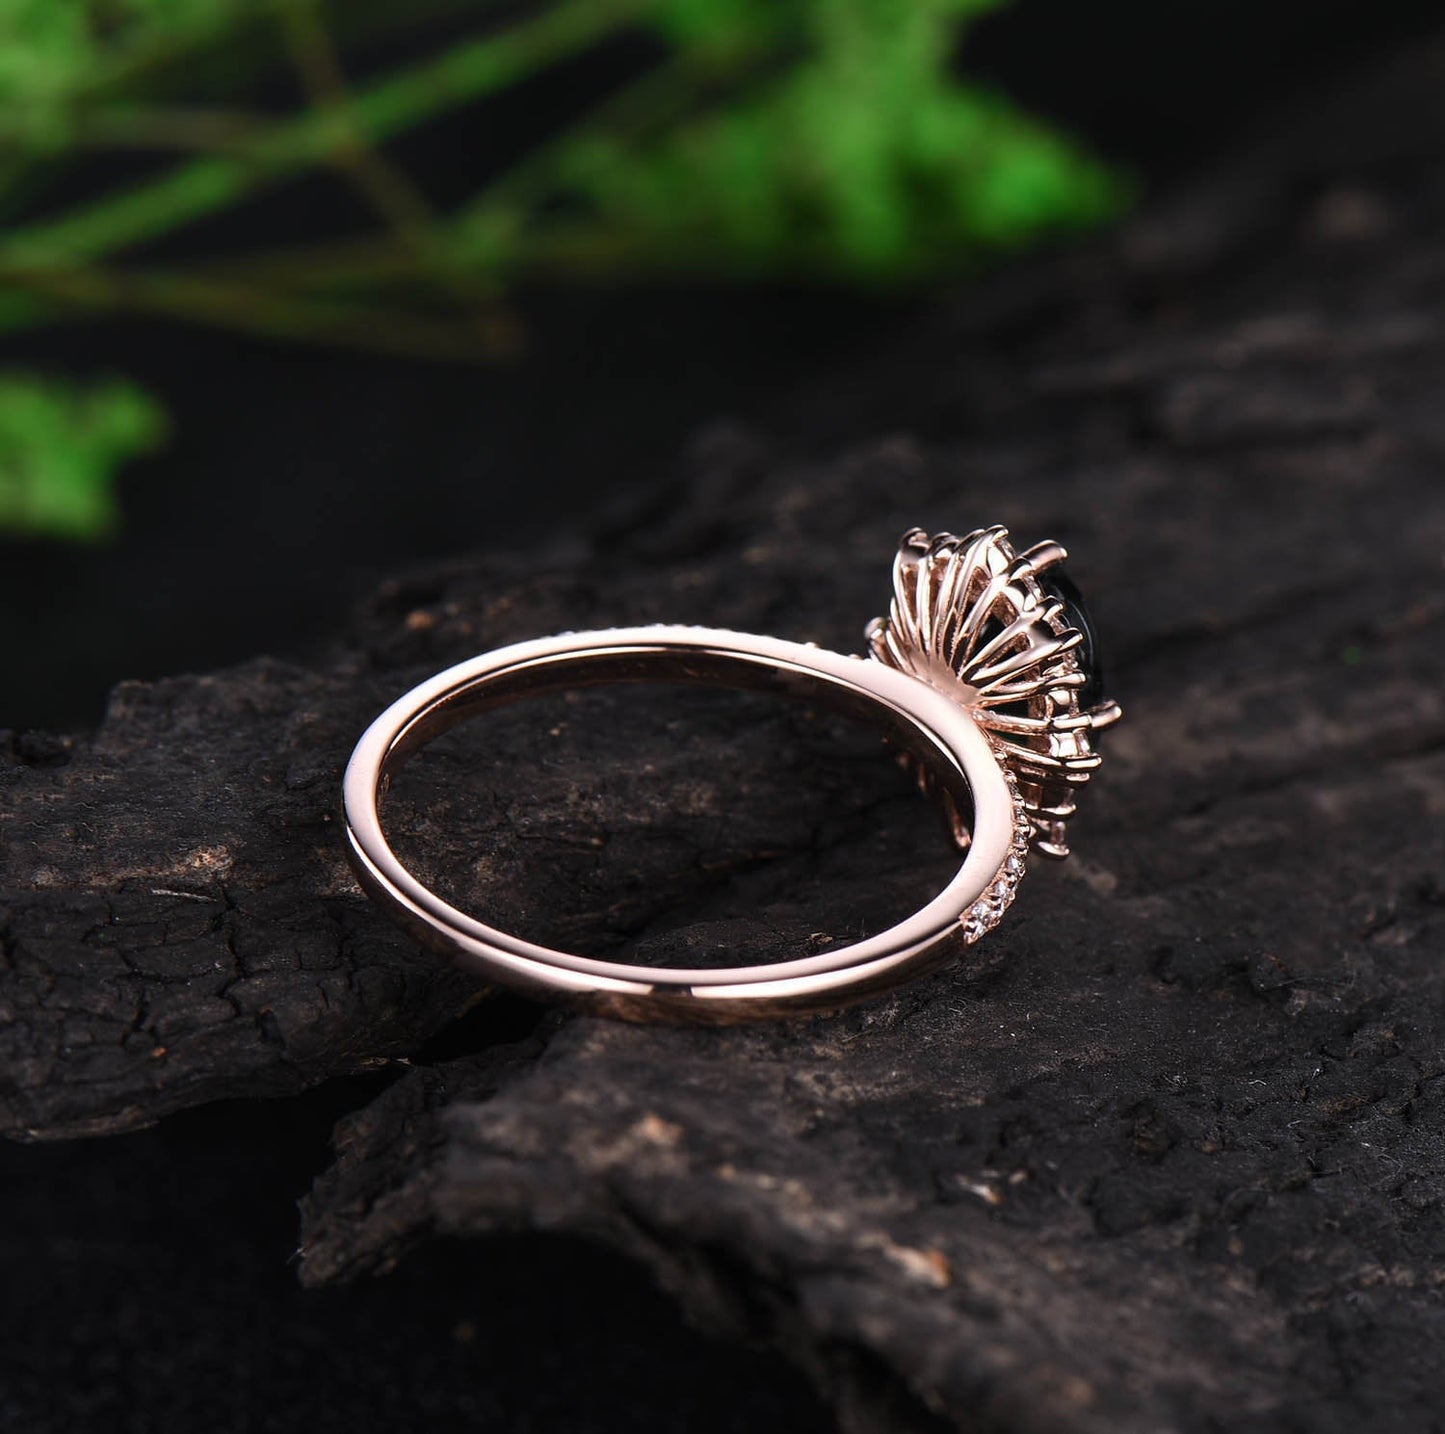 Vintage black rutilated quartz engagement ring moissanite unique best engagement ring rose gold ring for women dainty jewelry promise ring